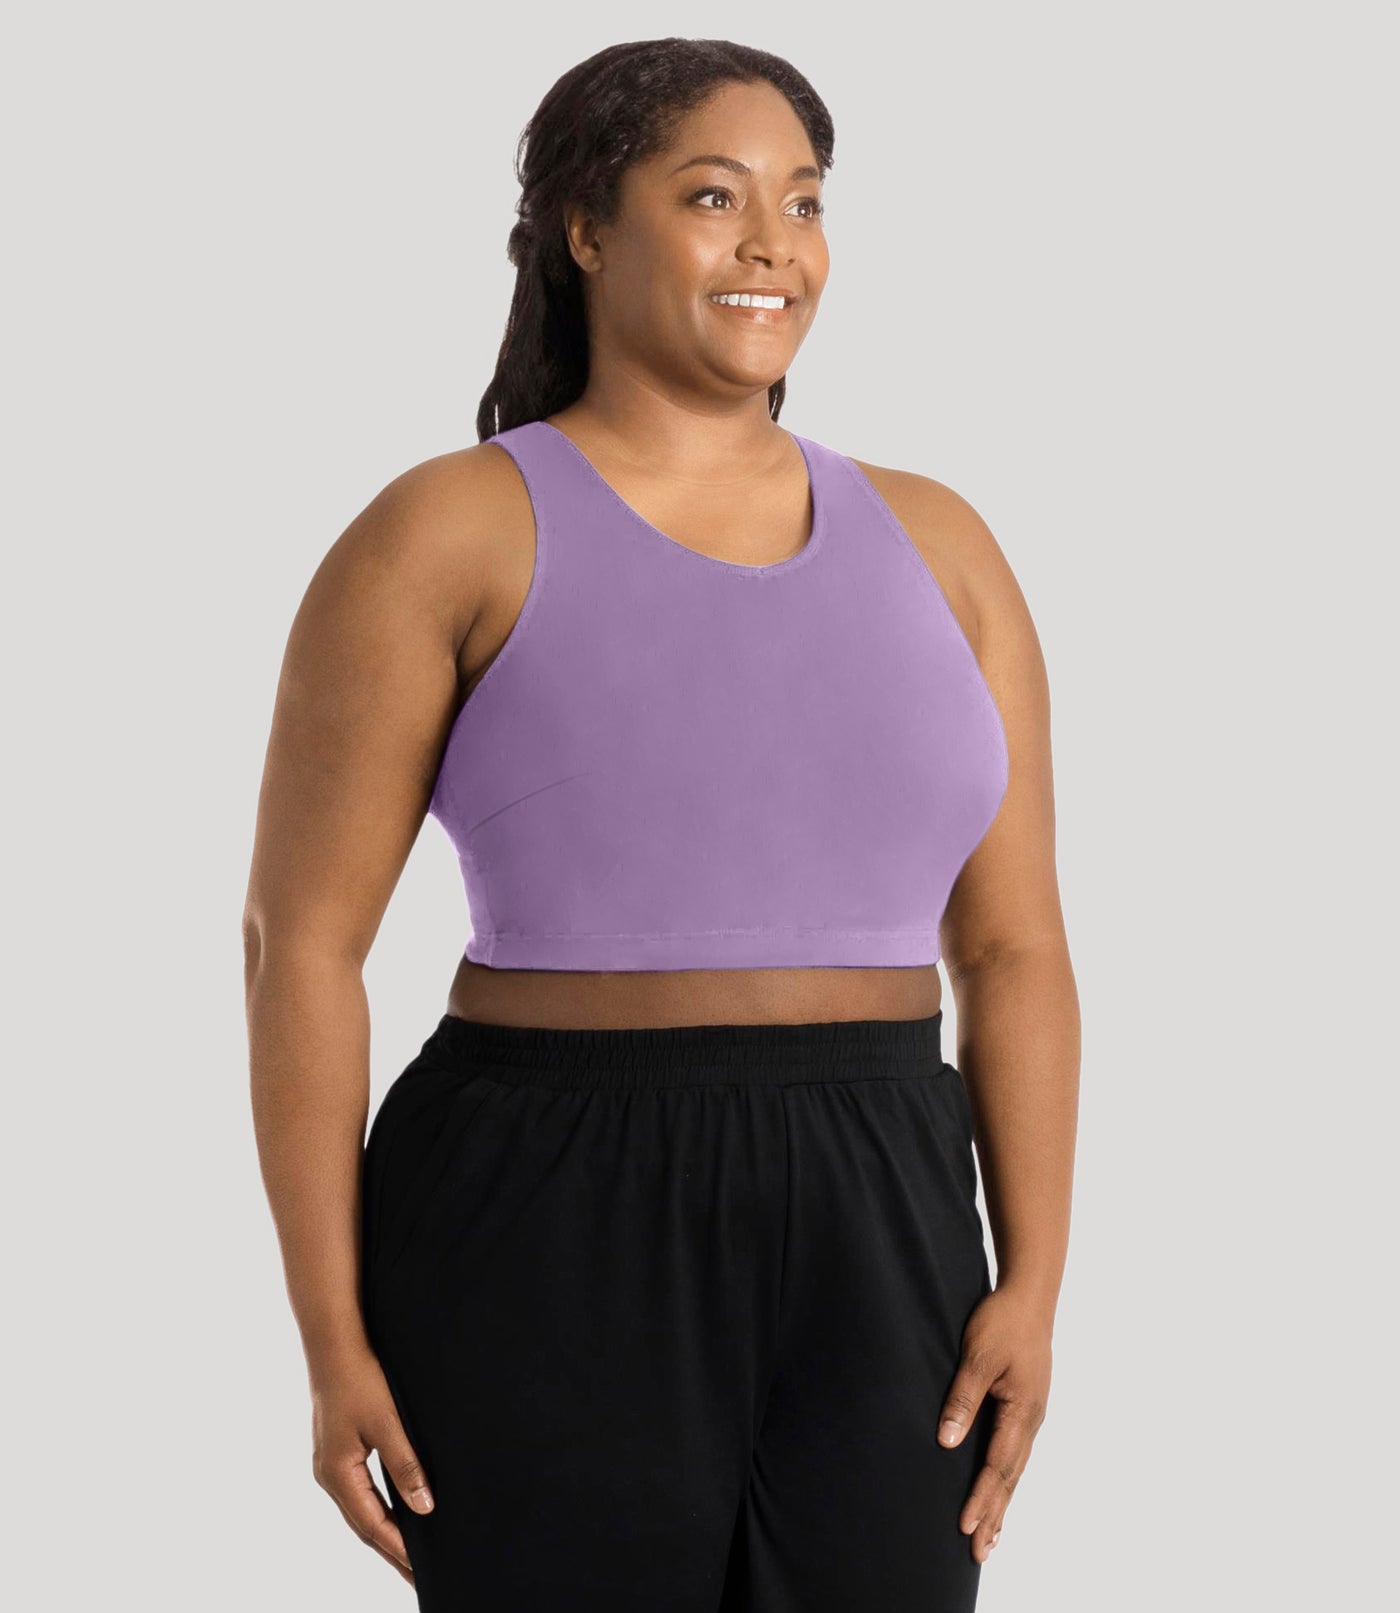 Plus size model, facing front, wearing stretch naturals full fit V-neck plus size bra in color lavender.